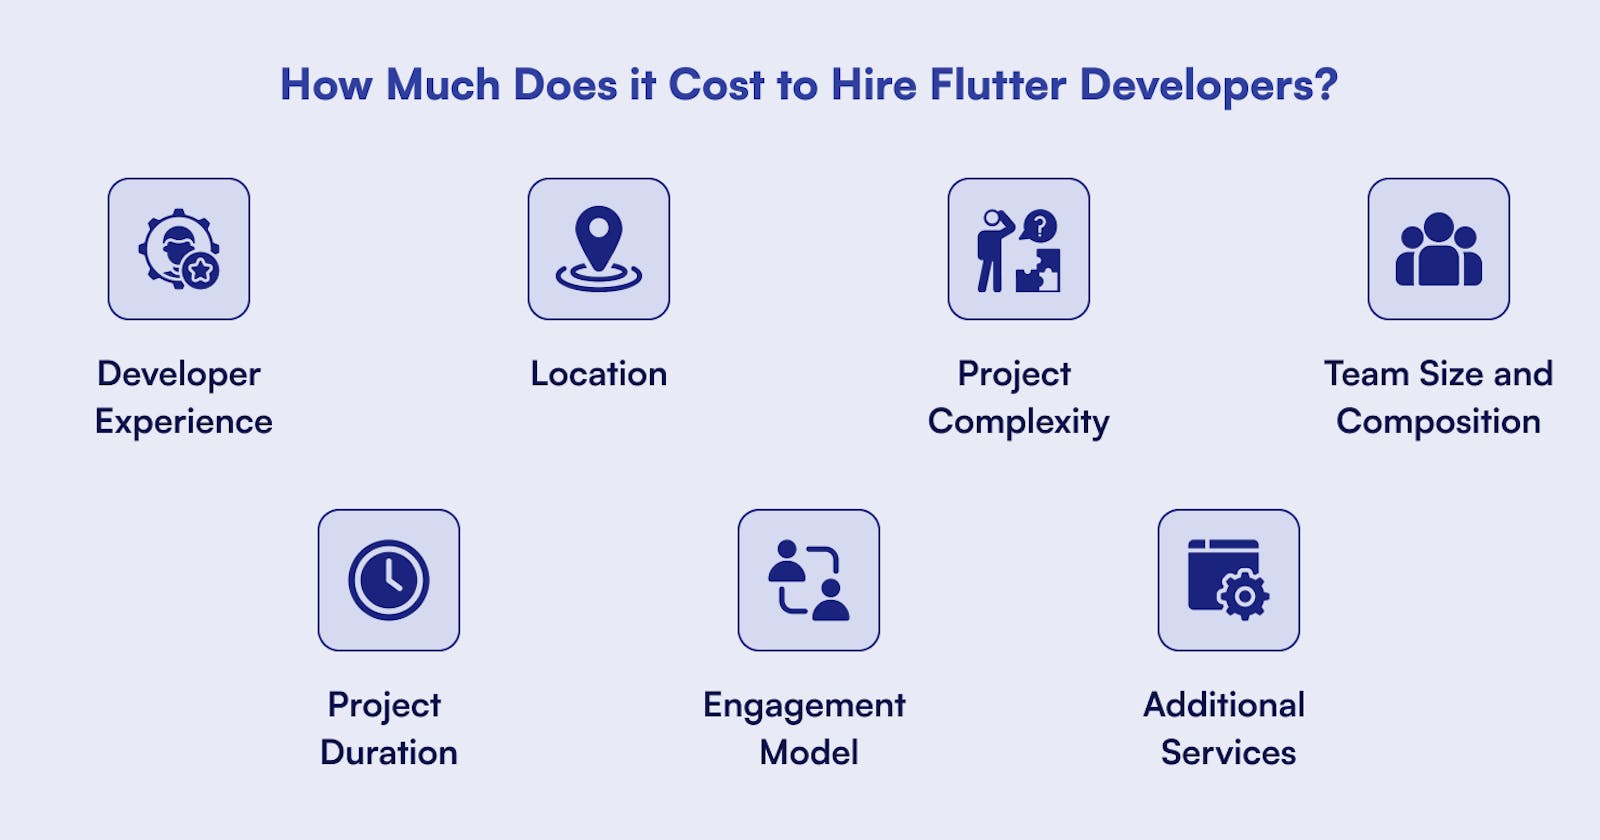 How Much Does it Cost to Hire Flutter Developers?